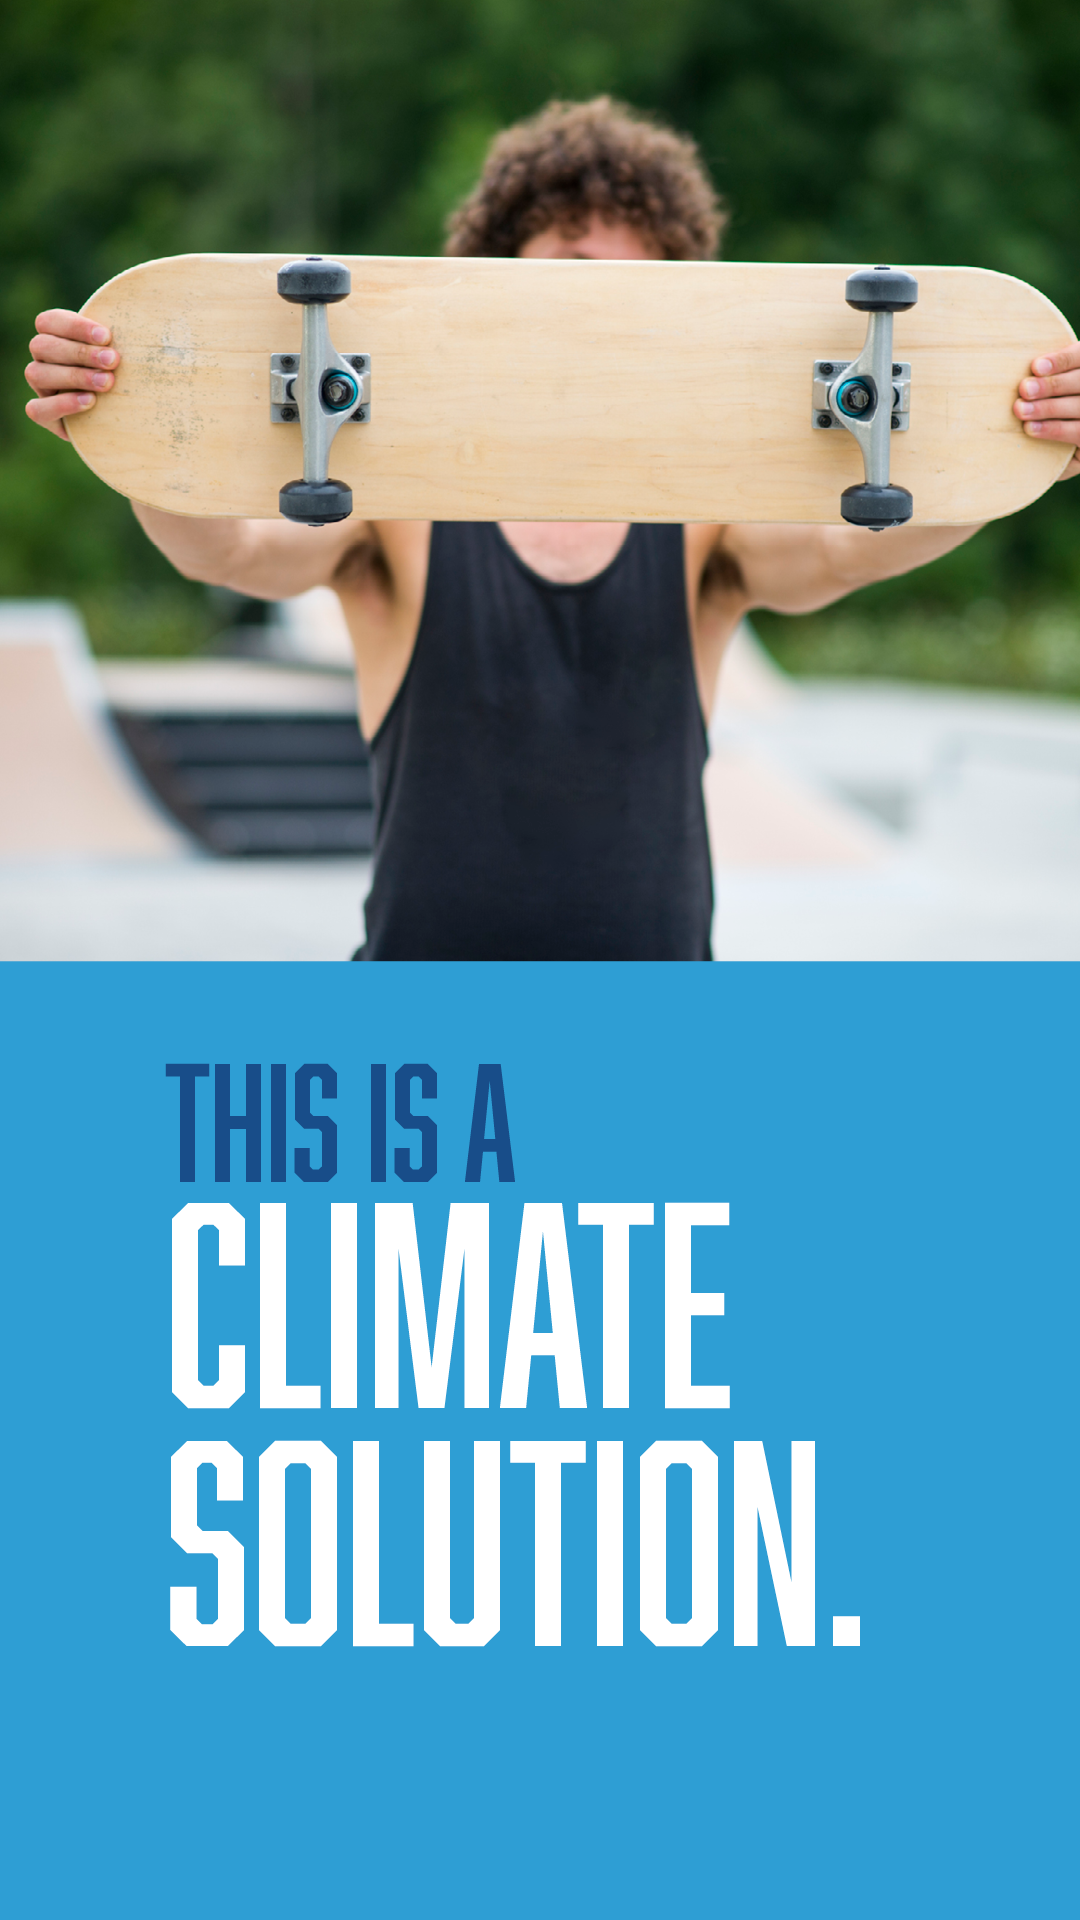 Wood Products Are a Climate Solution Series